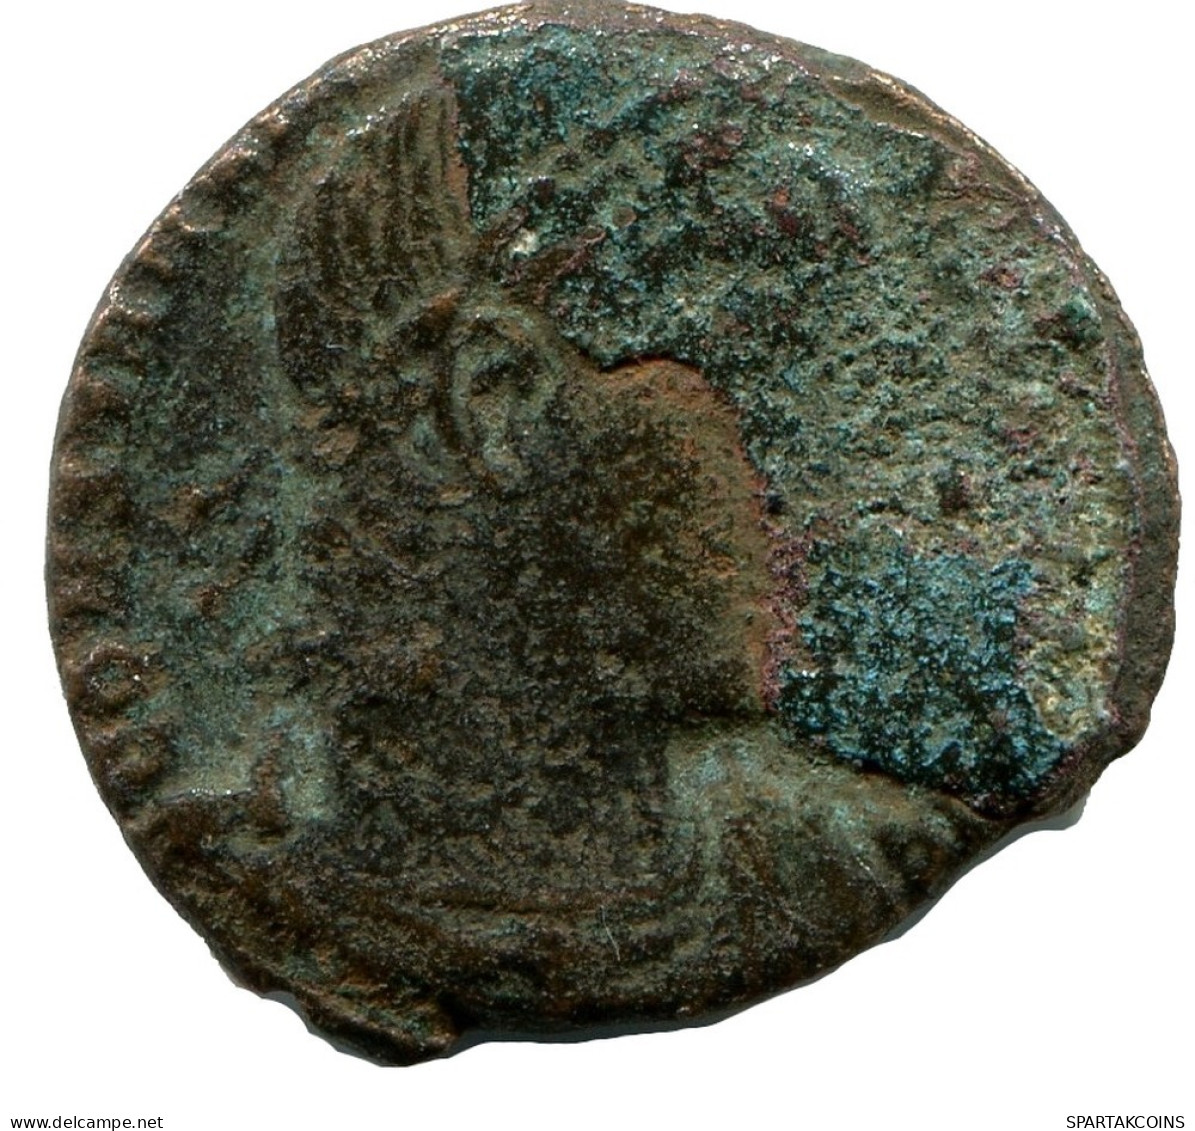 CONSTANTINE I MINTED IN CONSTANTINOPLE FOUND IN IHNASYAH HOARD #ANC10757.14.D.A - The Christian Empire (307 AD To 363 AD)